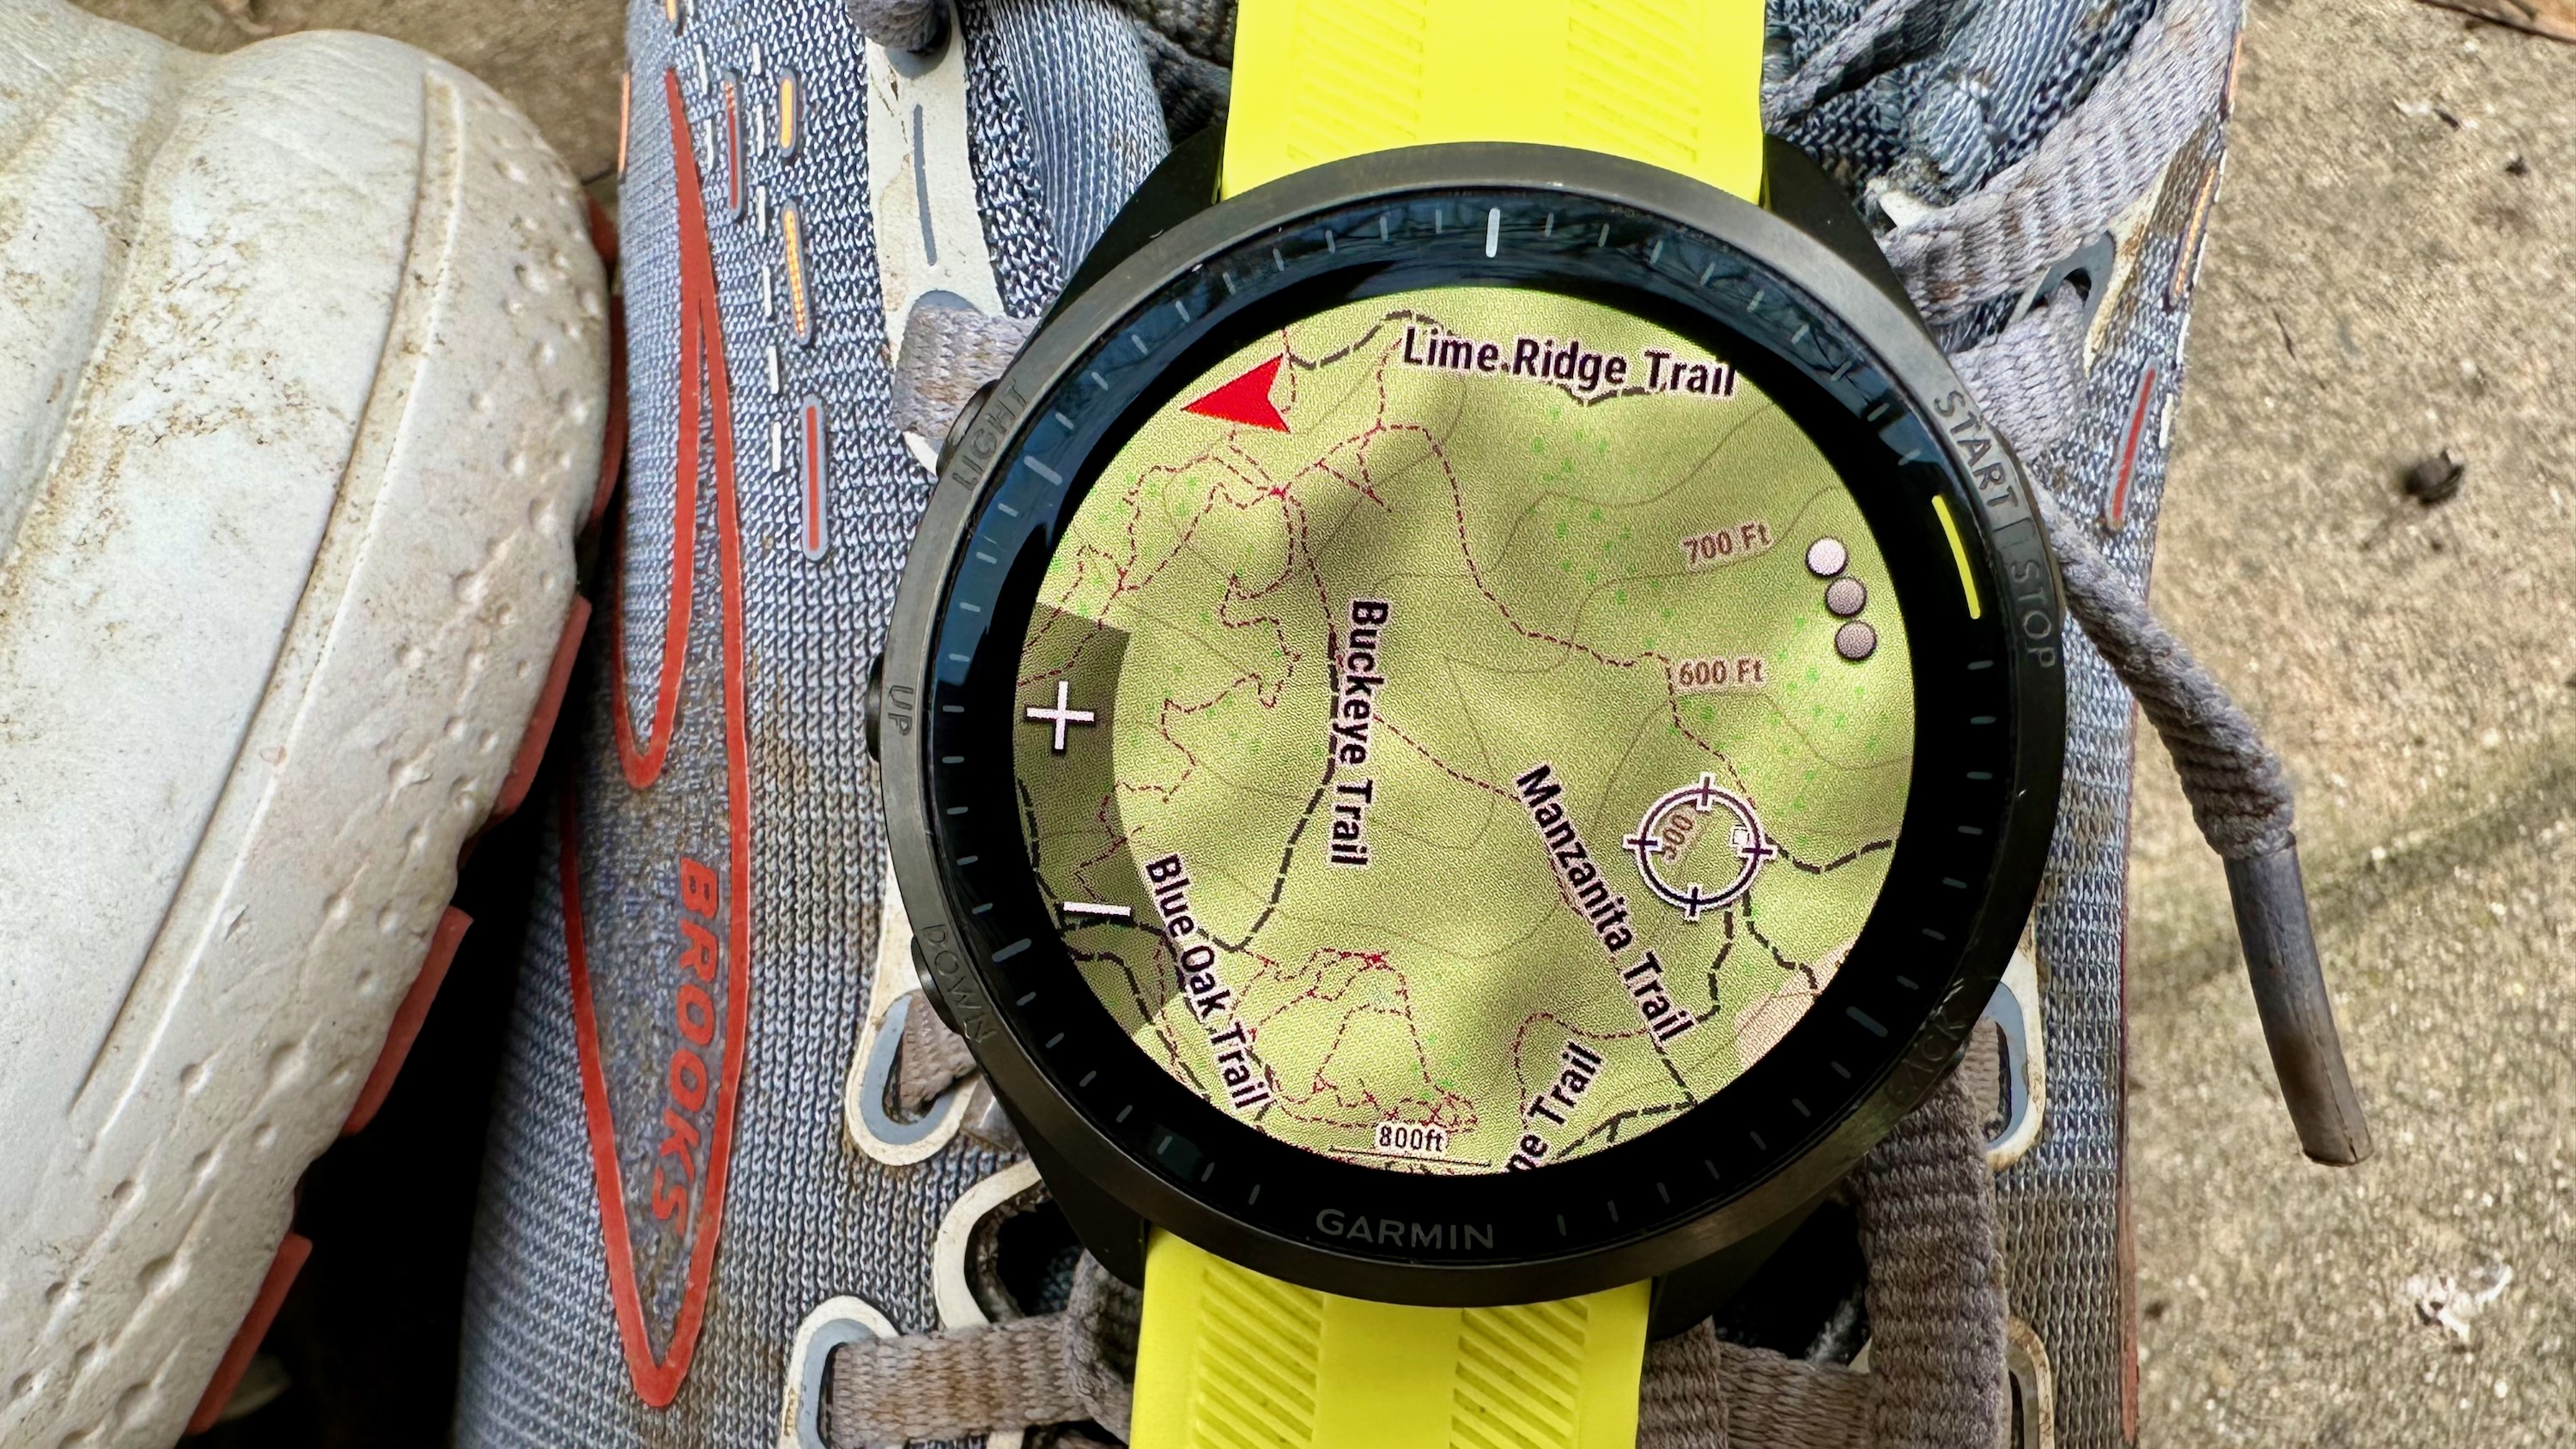 The Garmin Forerunner 965 showing a topographic map of a nearby park.